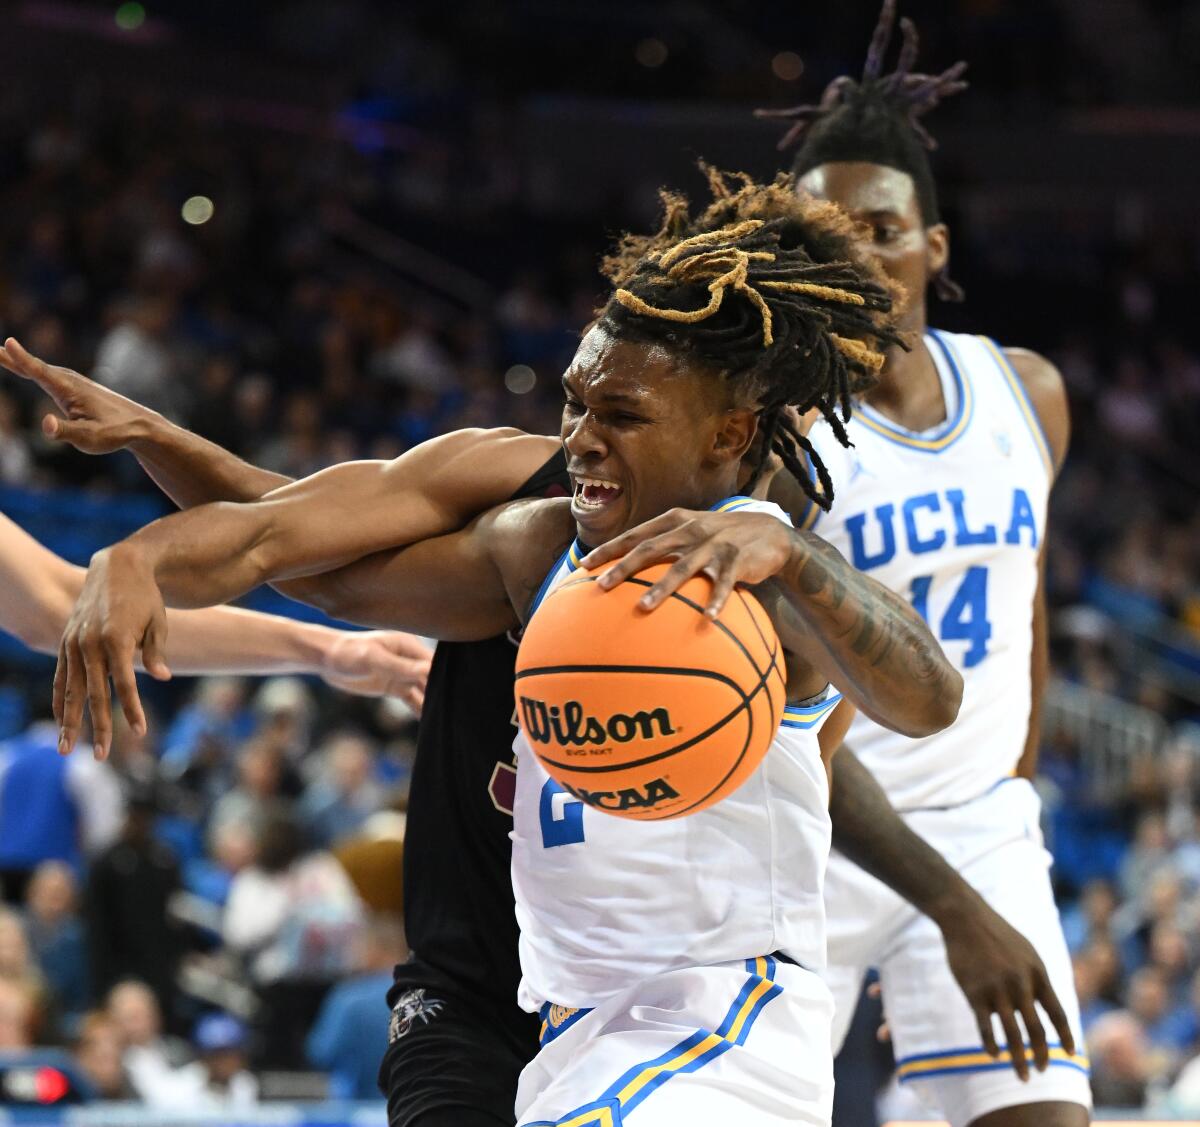 UCLA guard Dylan Andrews is fouled by Lafayette guard Devin Hines while driving to the basket at Pauley Pavilion.